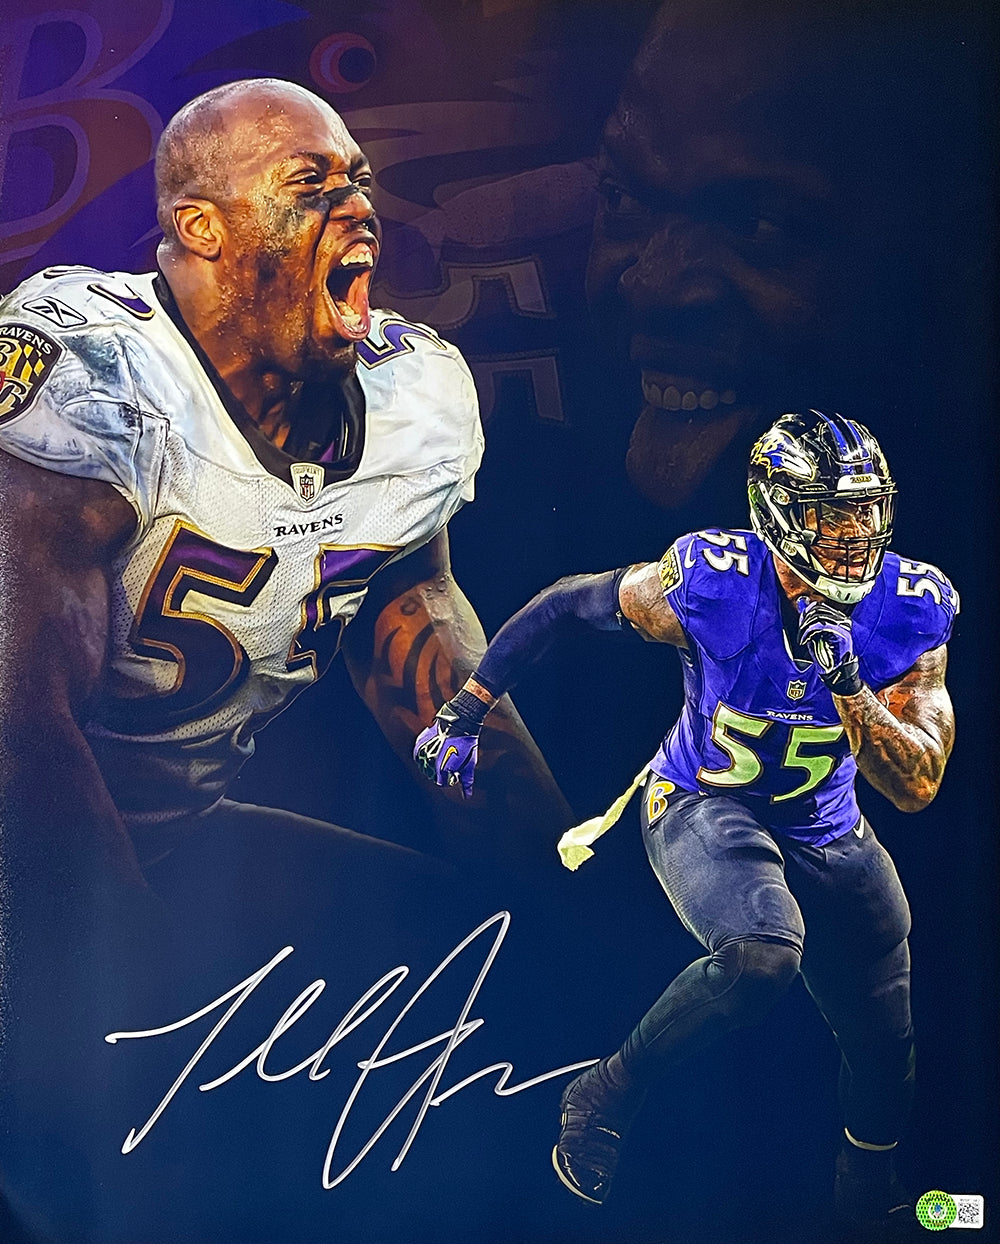 Ravens To Induct Terrell Suggs Into Ring Of Honor - PressBox